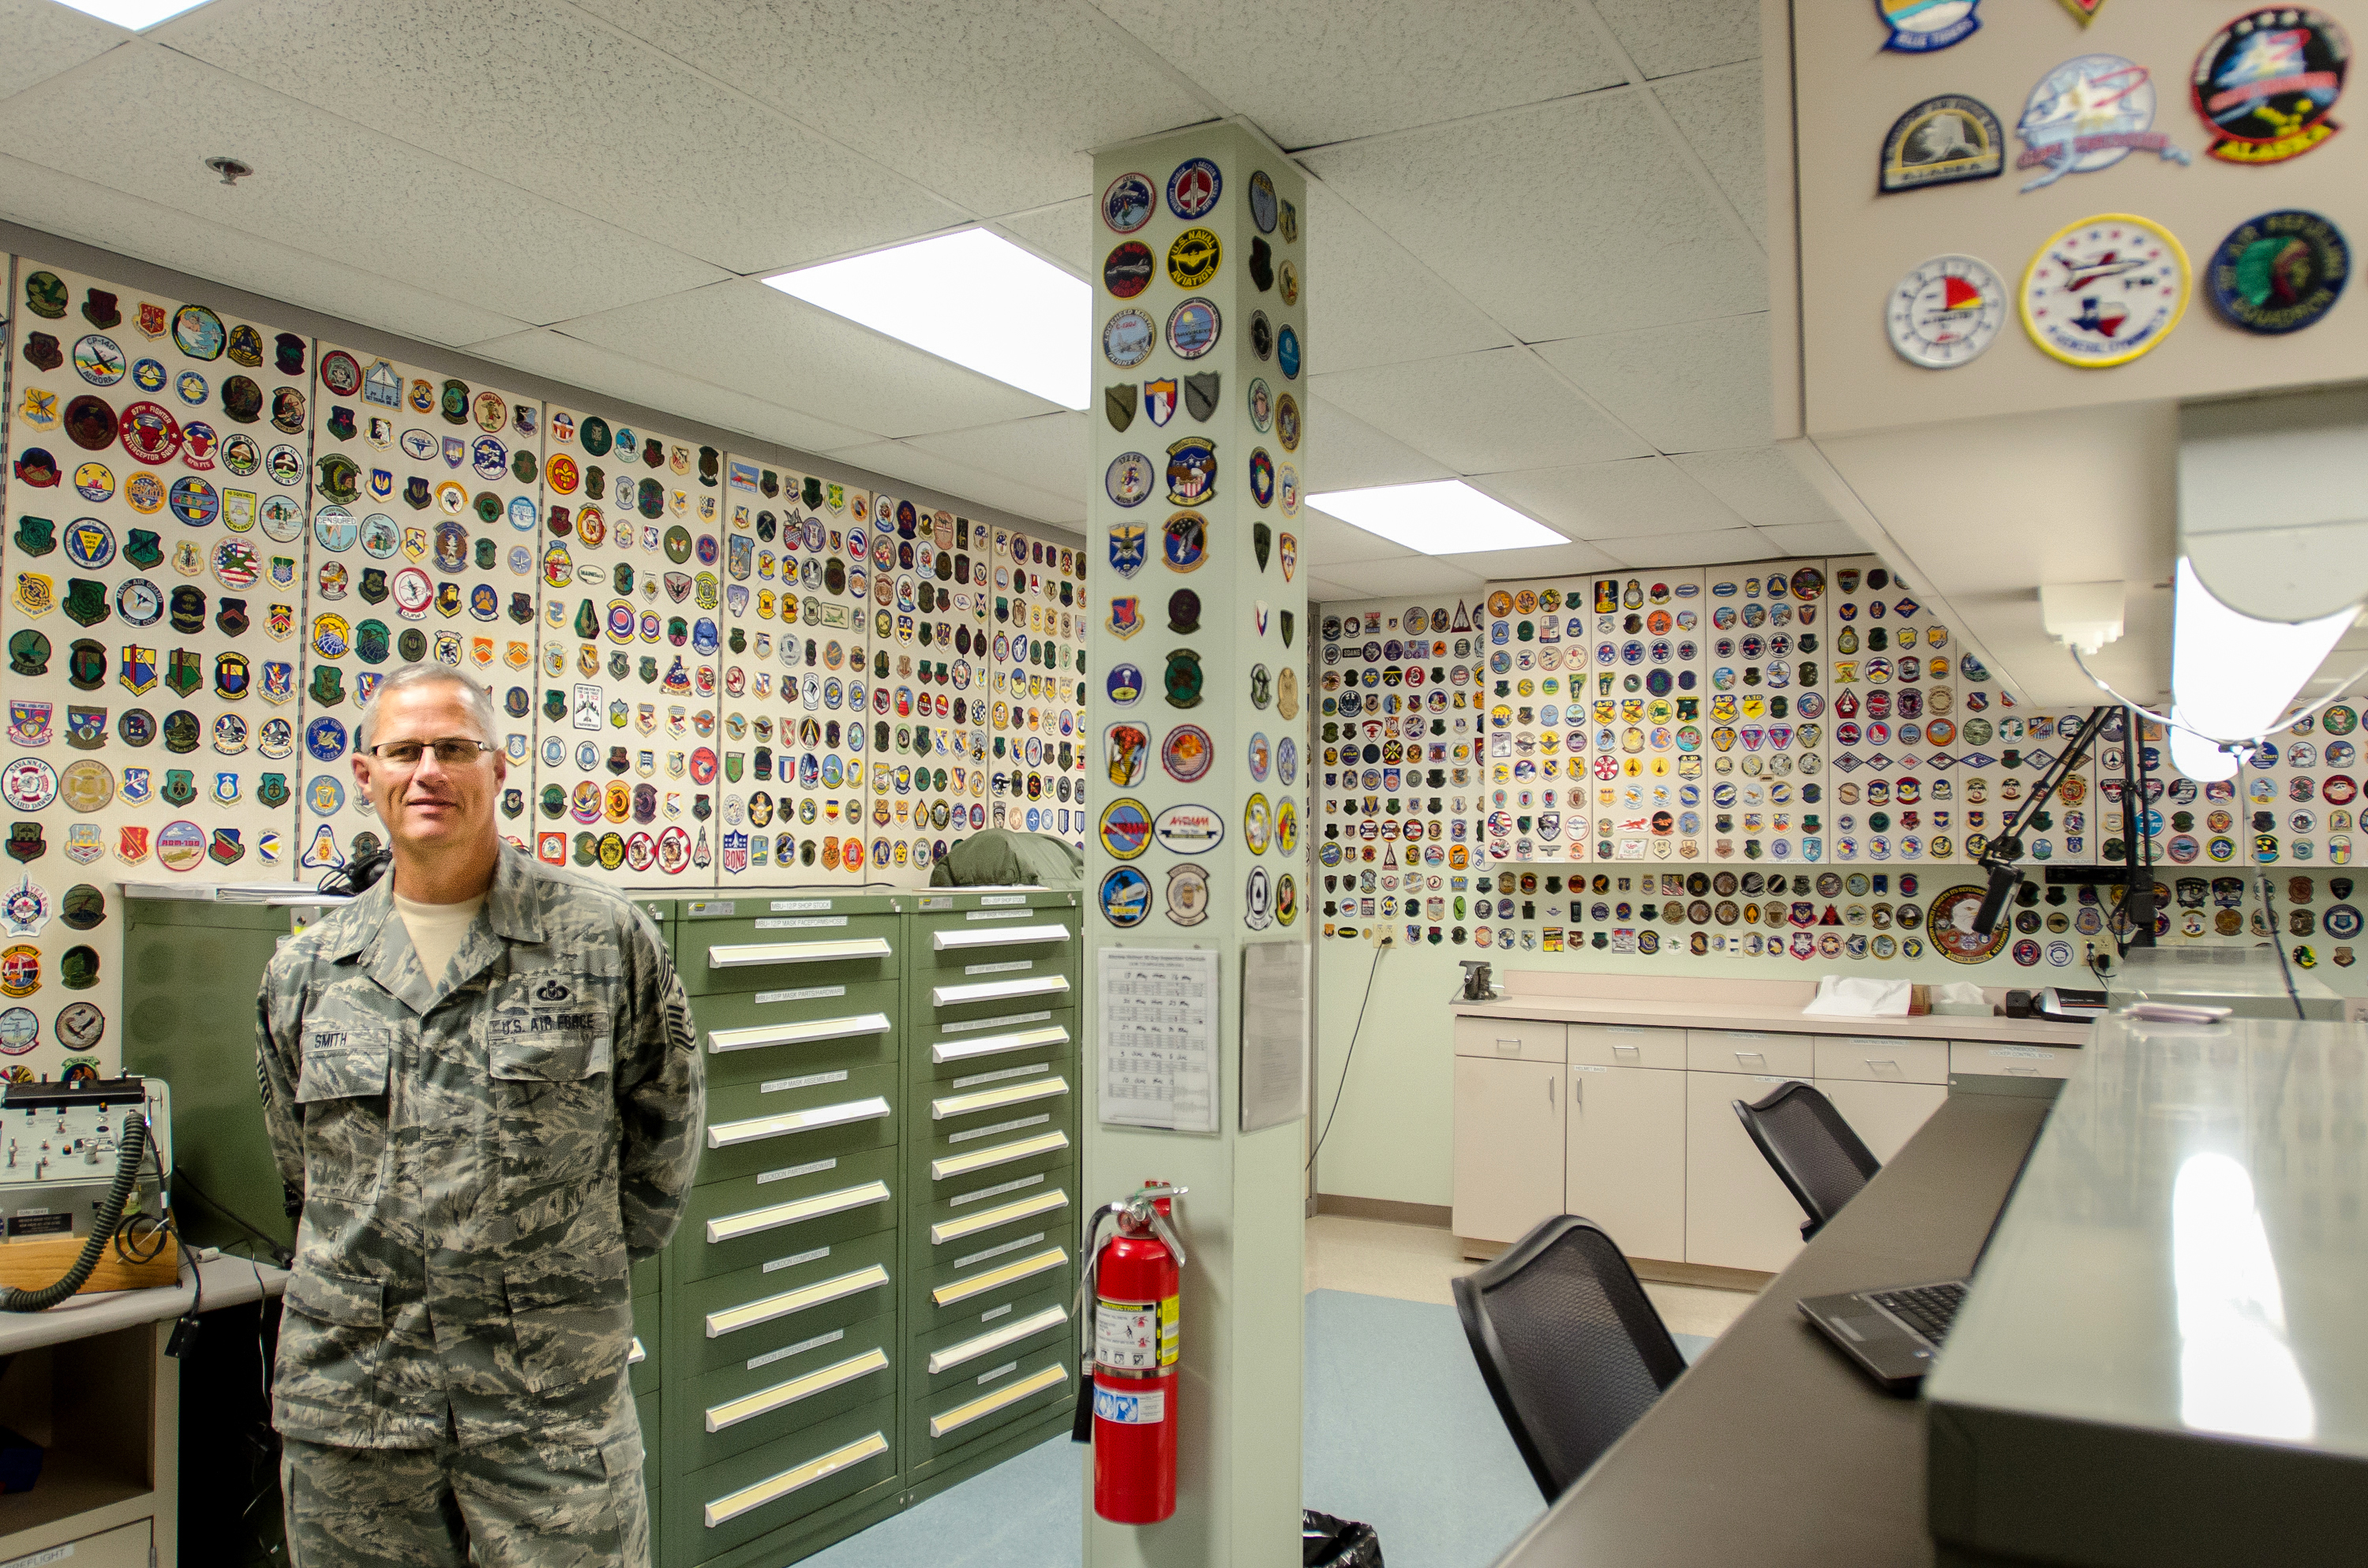 Military patch collection a labor of love for Smith, Aircrew